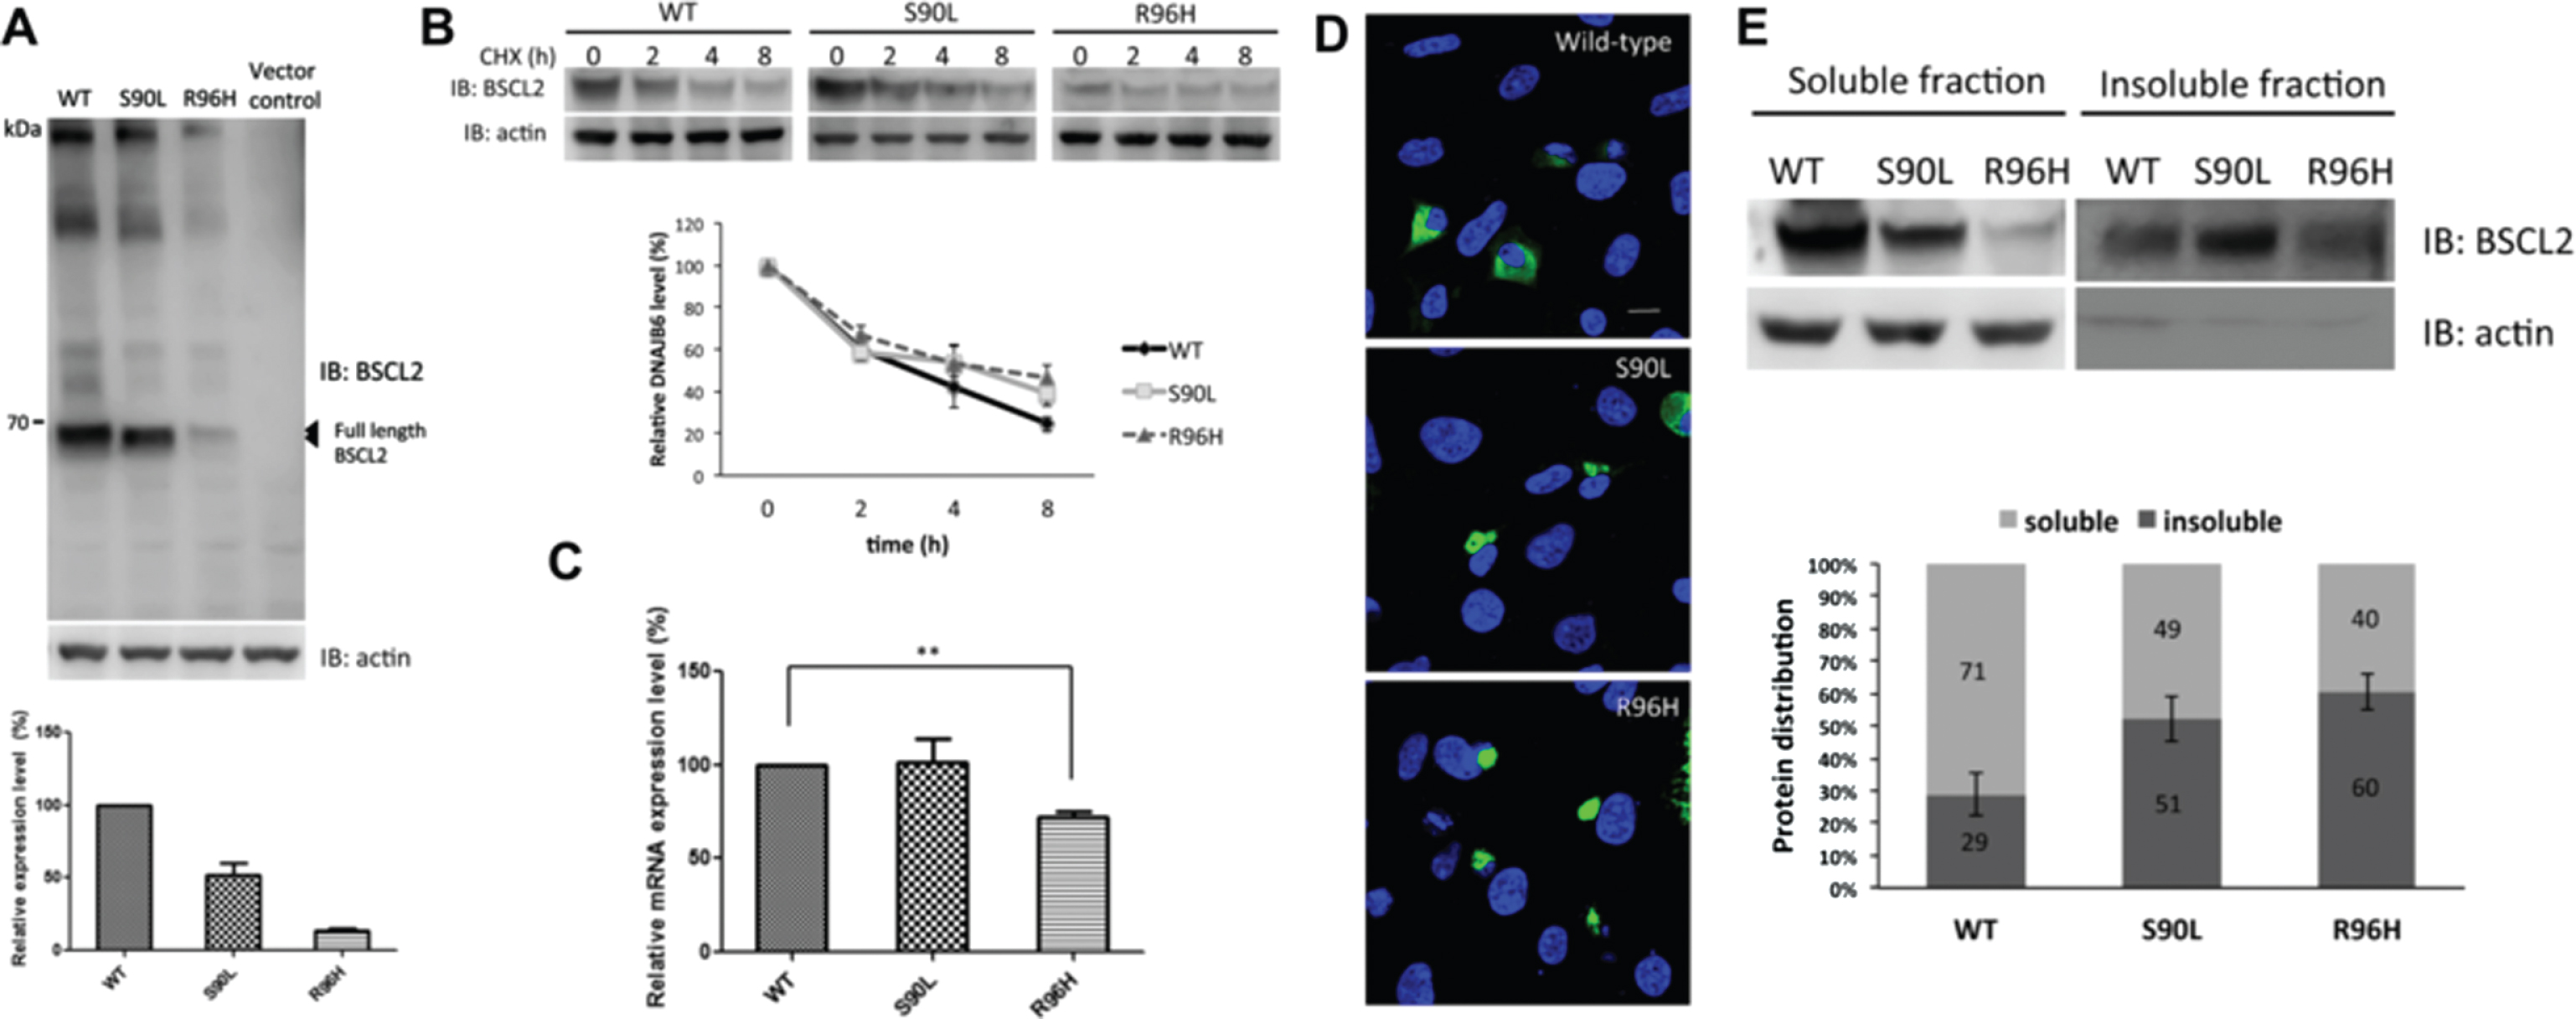 Fig. 2. In vitro expression of BSCL2 and the characterization of wild-type (WT) and mutant seipin proteins in HEK293T cells.